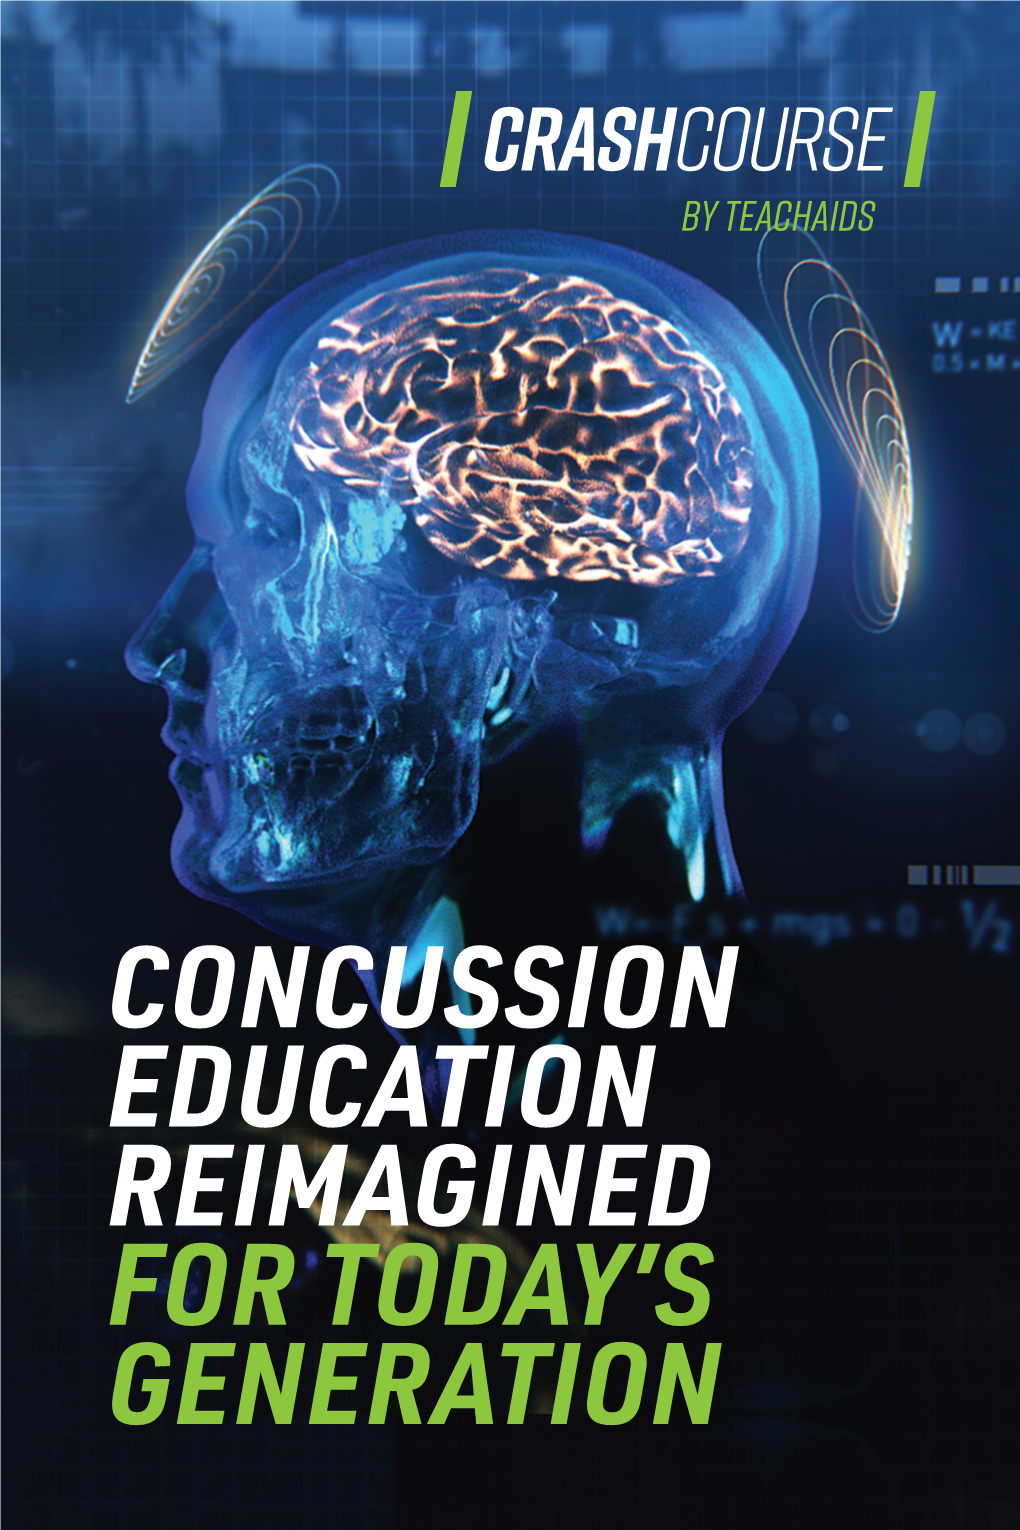 Concussion Education Reimagined for Today's Generation